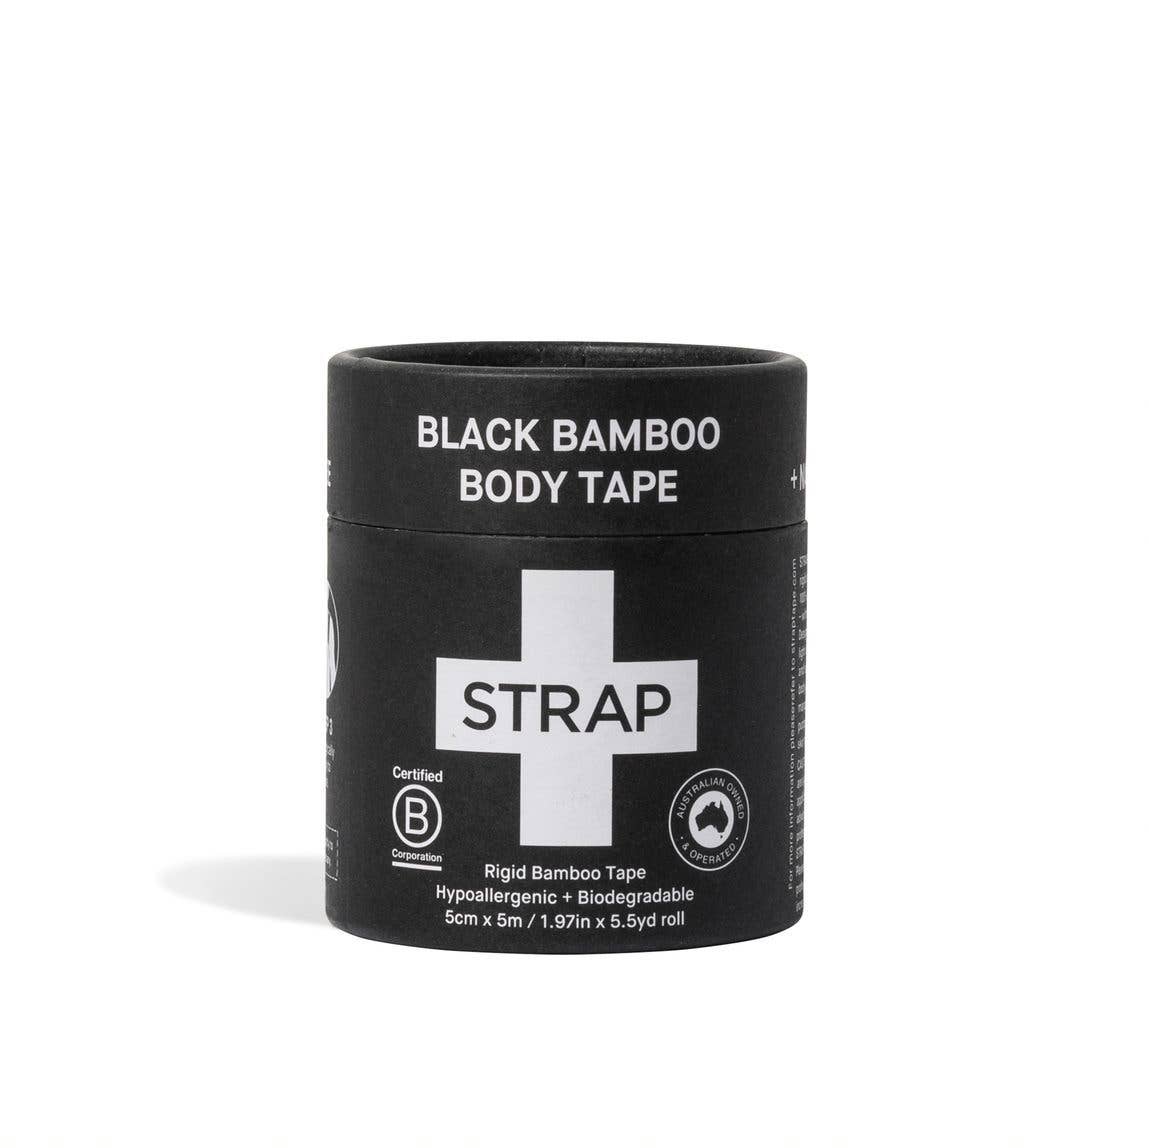 Patch Bamboo Bandages - STRAP Black Bamboo Body Tape